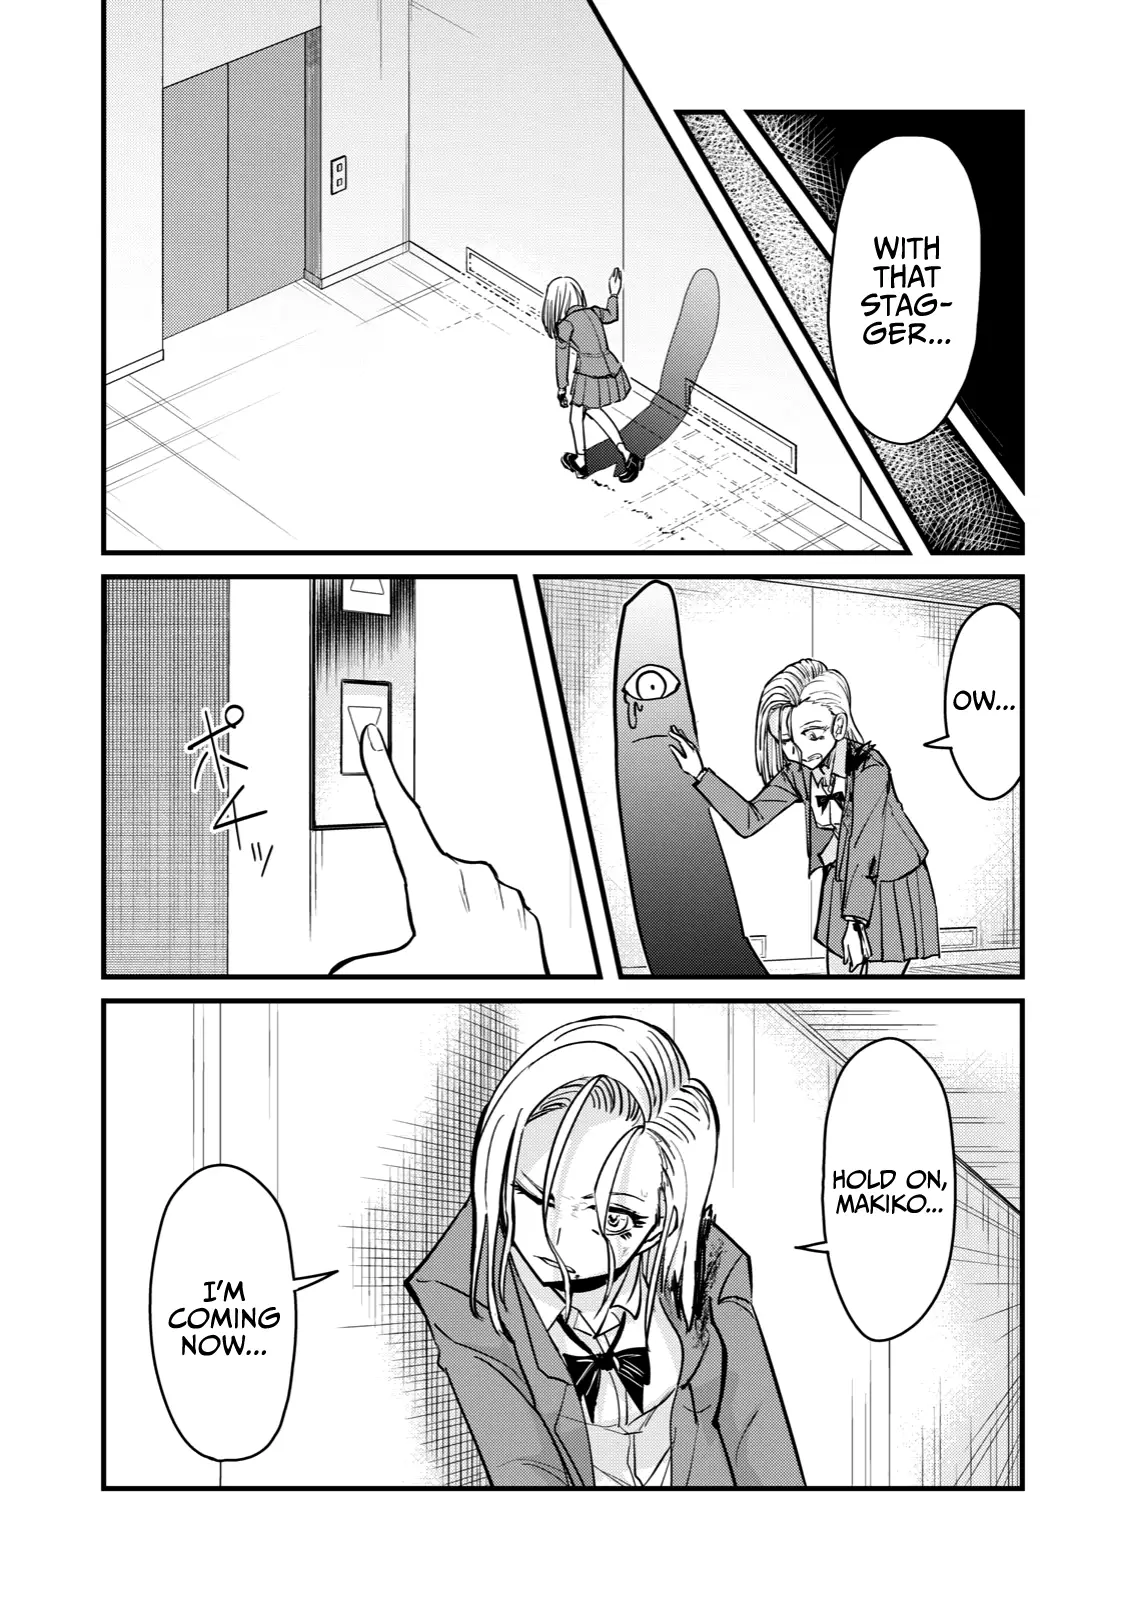 A Manga About The Kind Of Pe Teacher Who Dies At The Start Of A School Horror Movie - 64 page 15-4cad2081